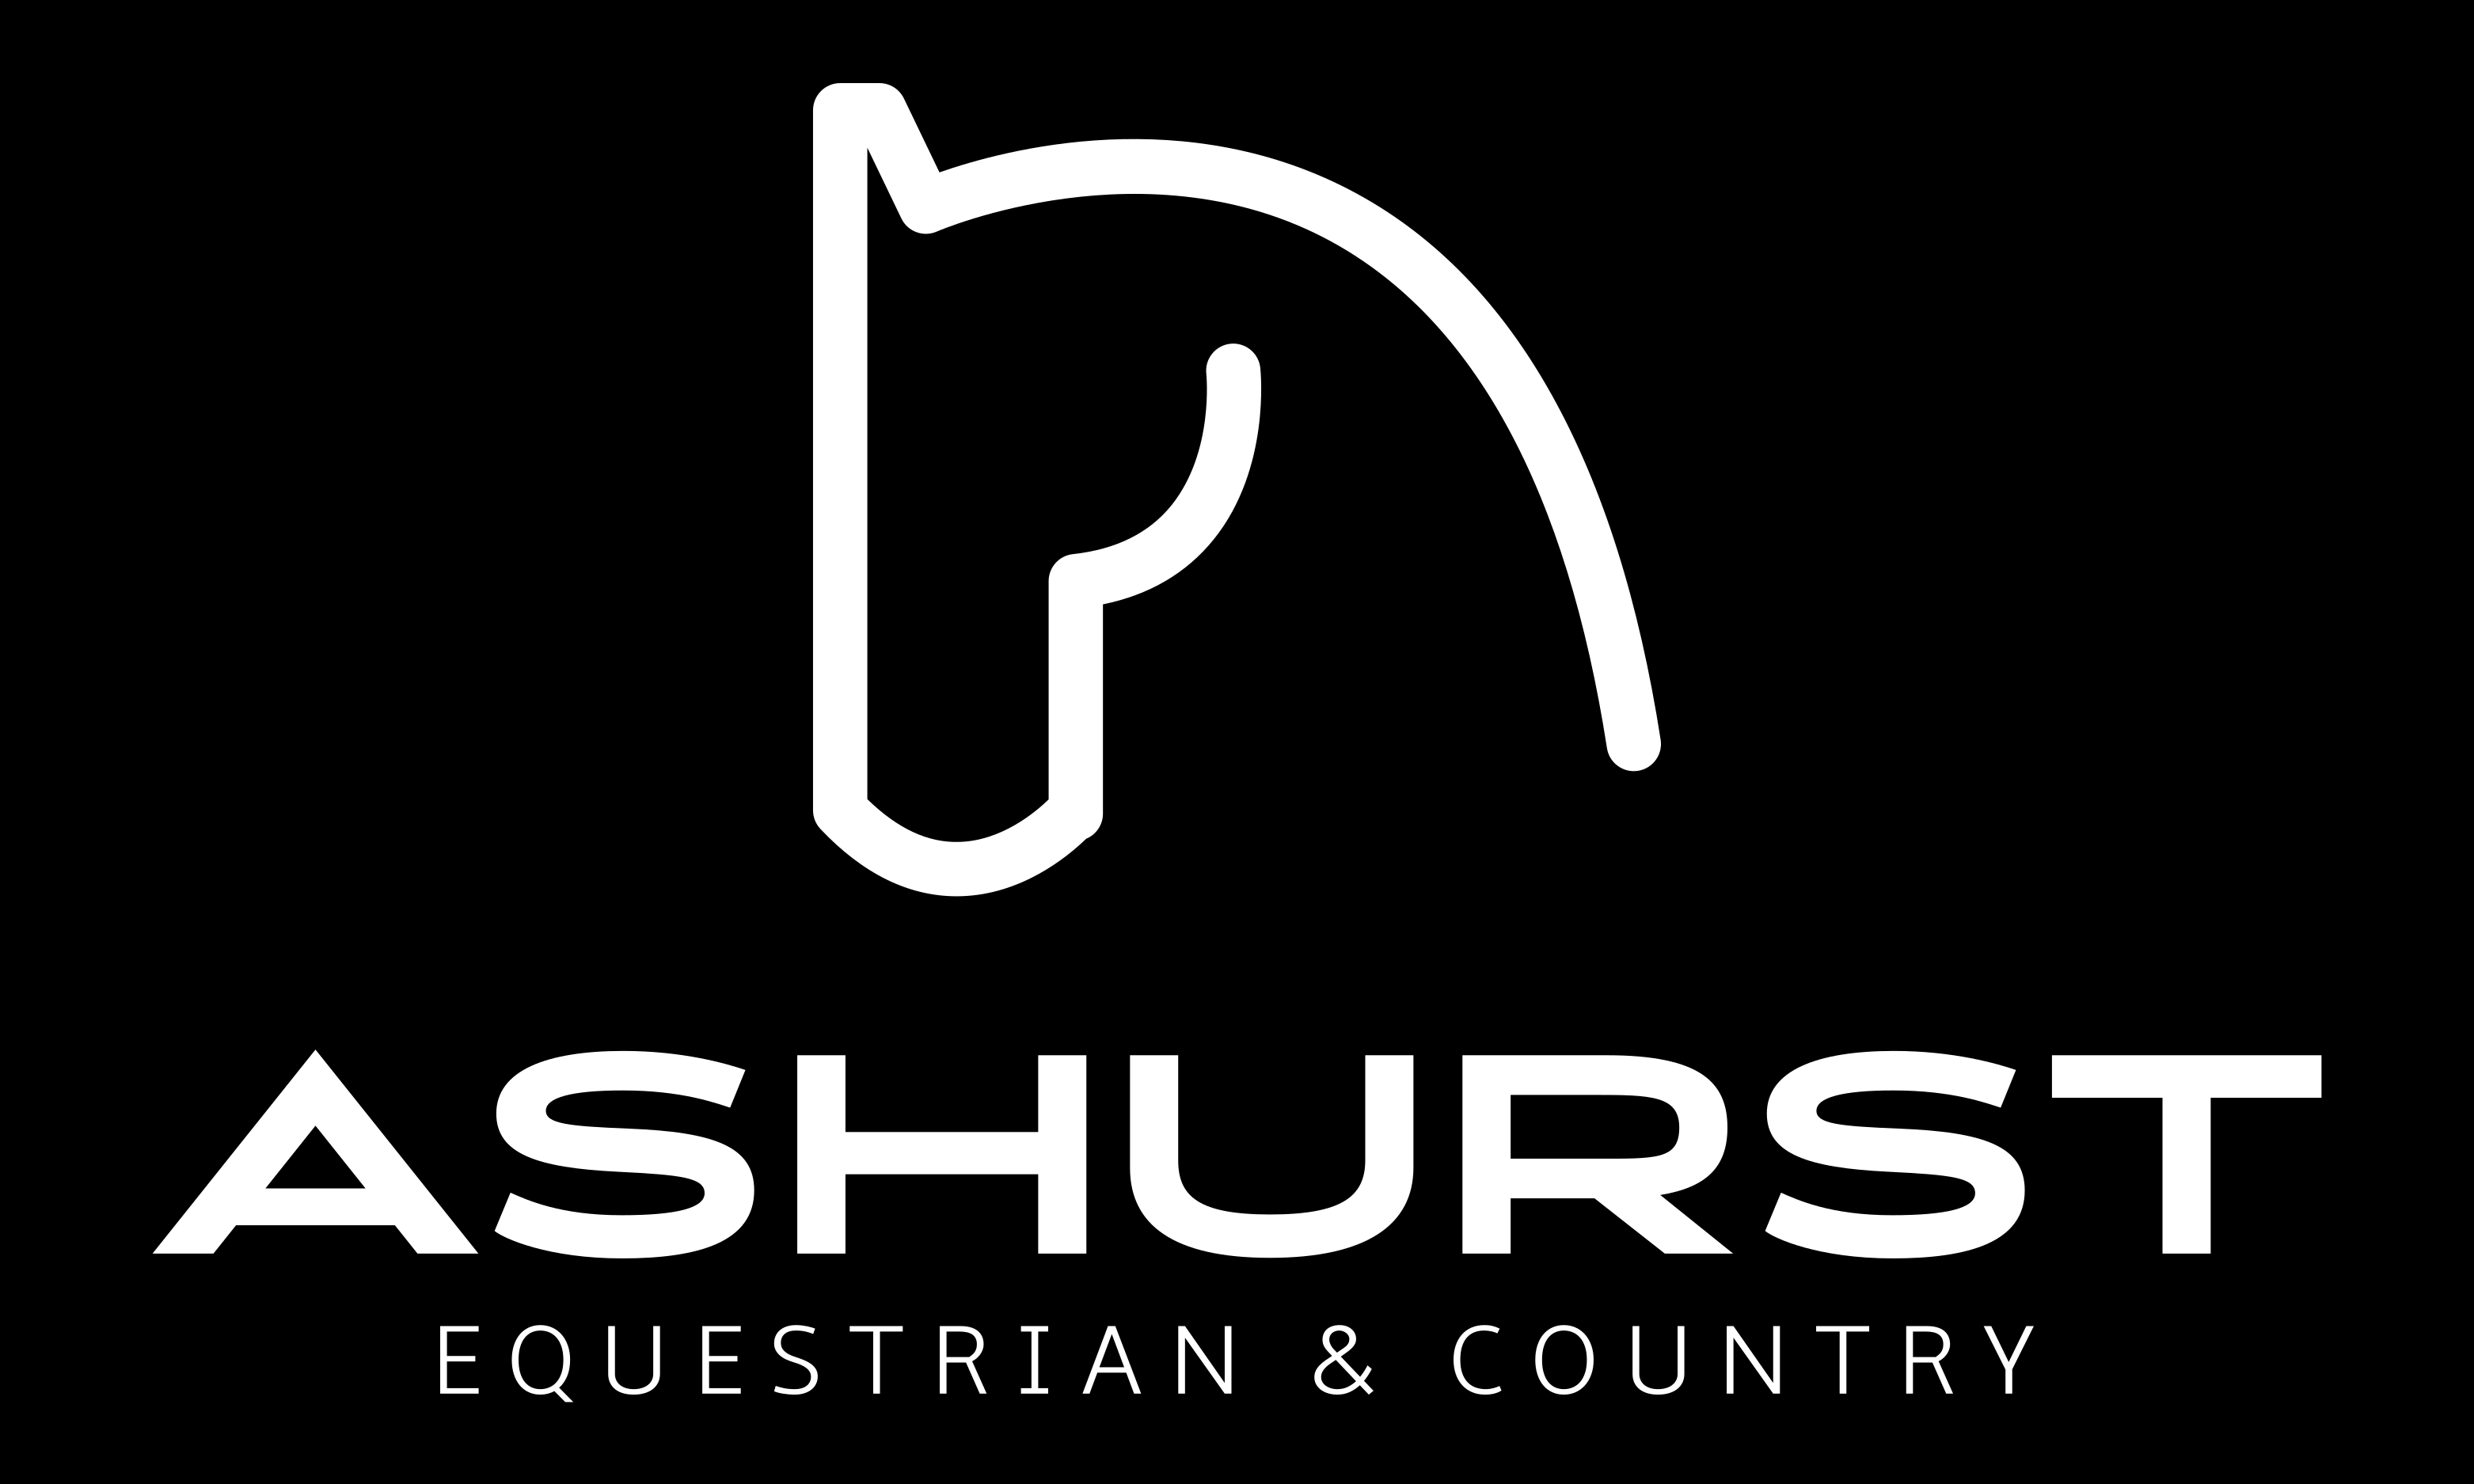 Ashurst Equestrian & Country